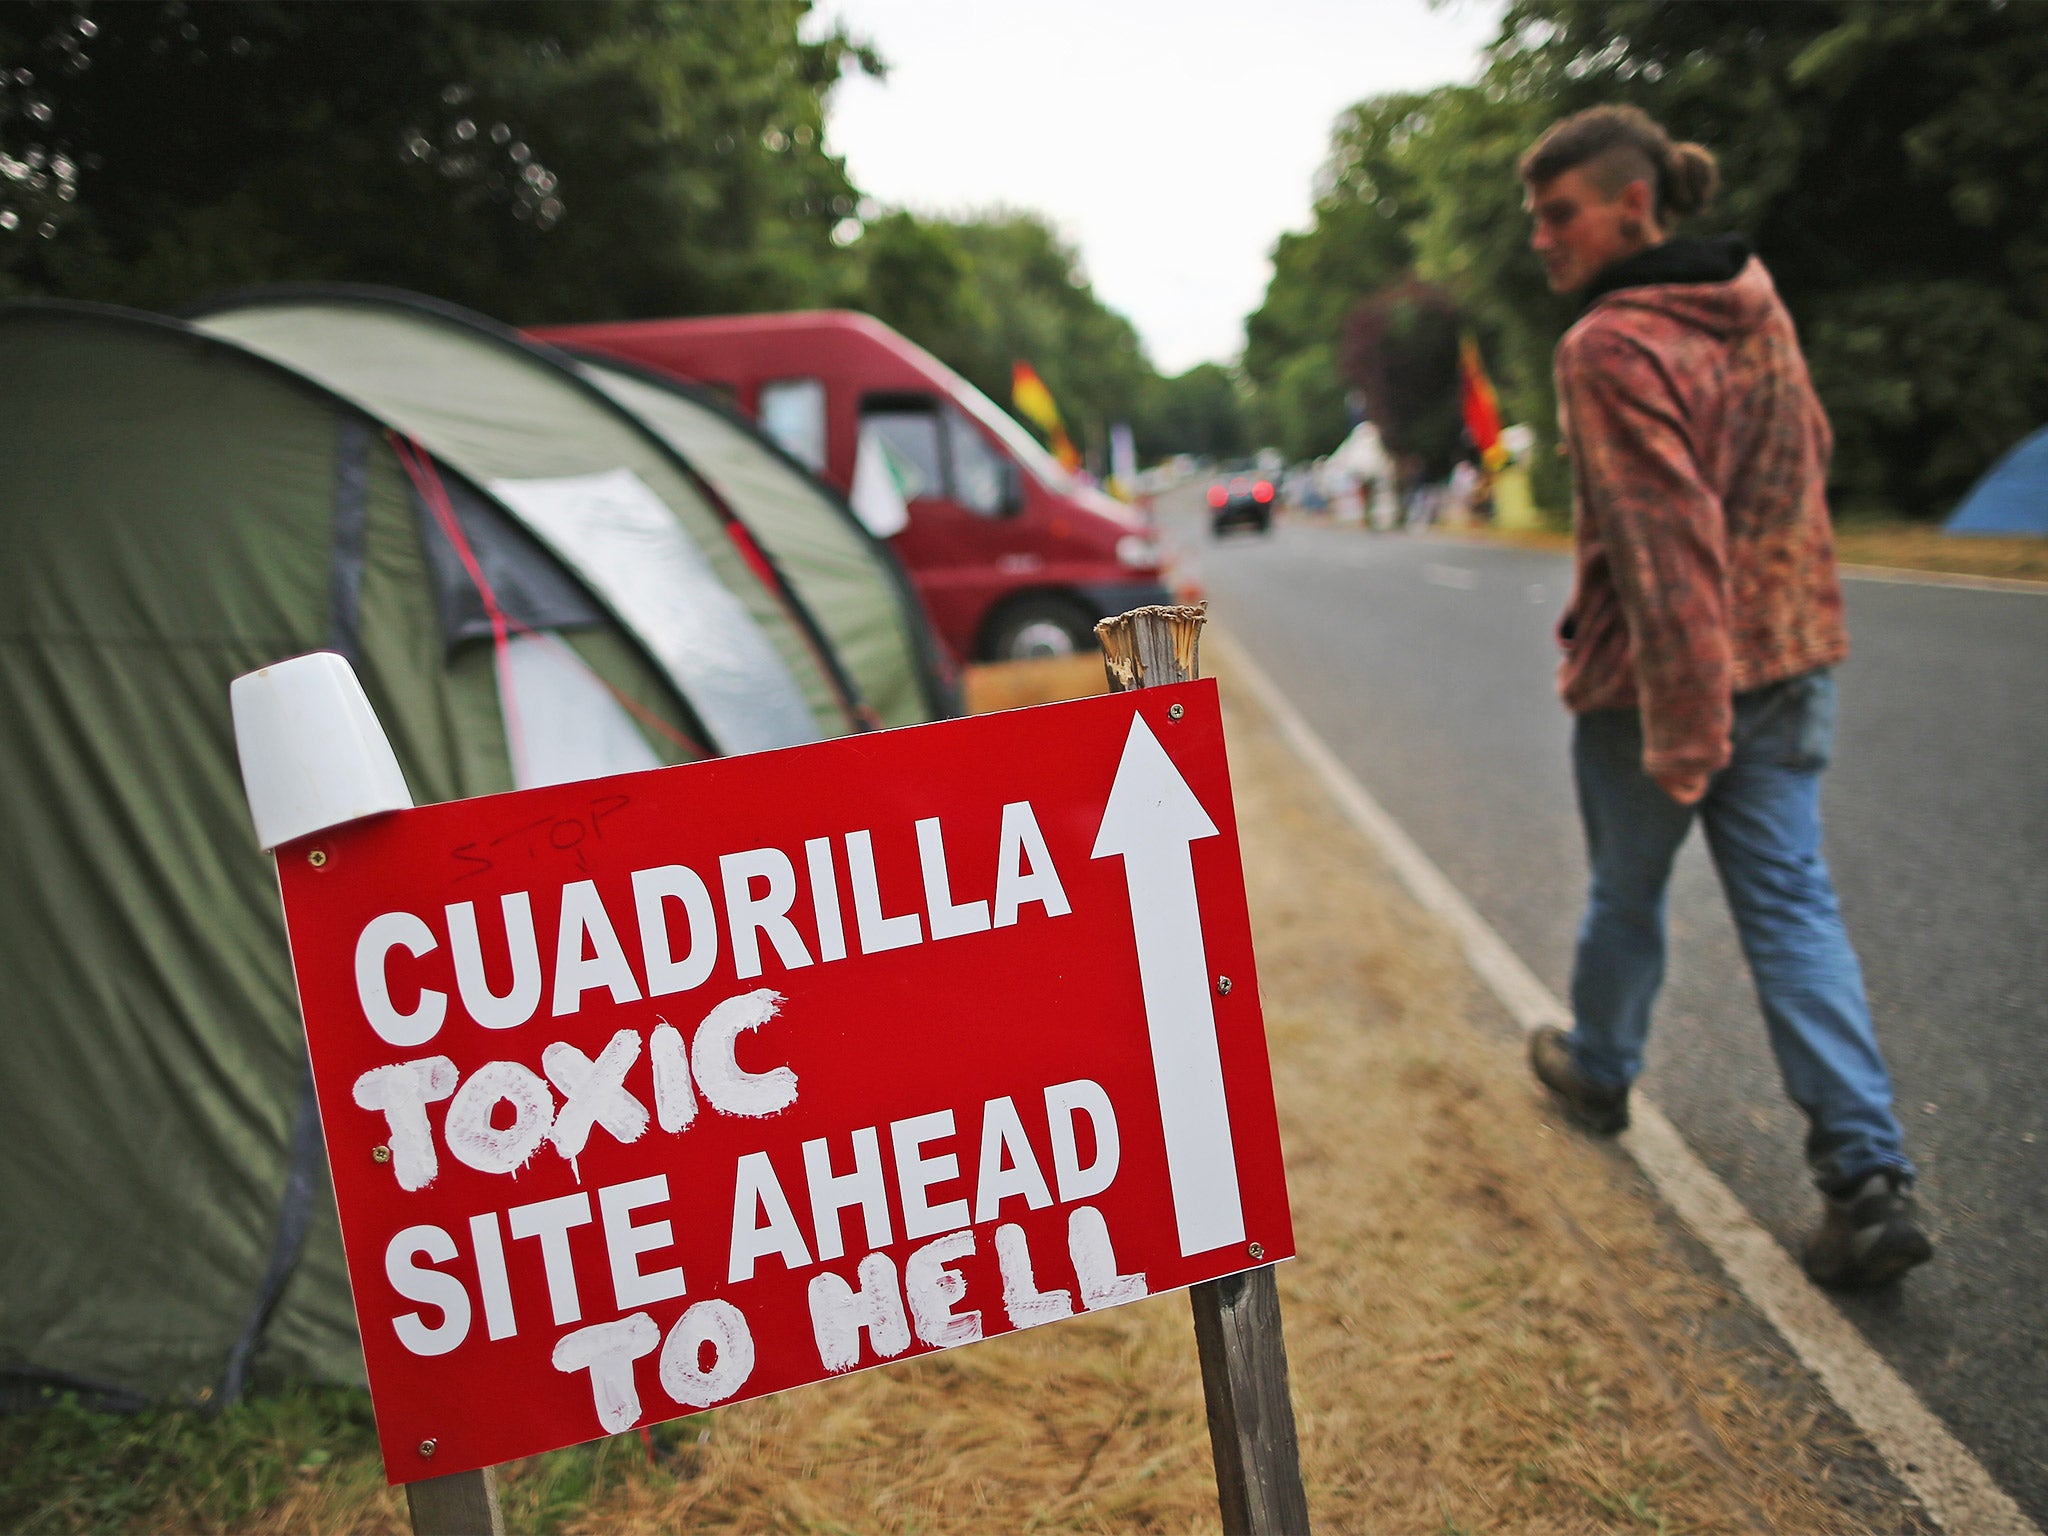 A protest near a drill site operated by Cuadrilla in Balcombe, West Sussex, in 2013